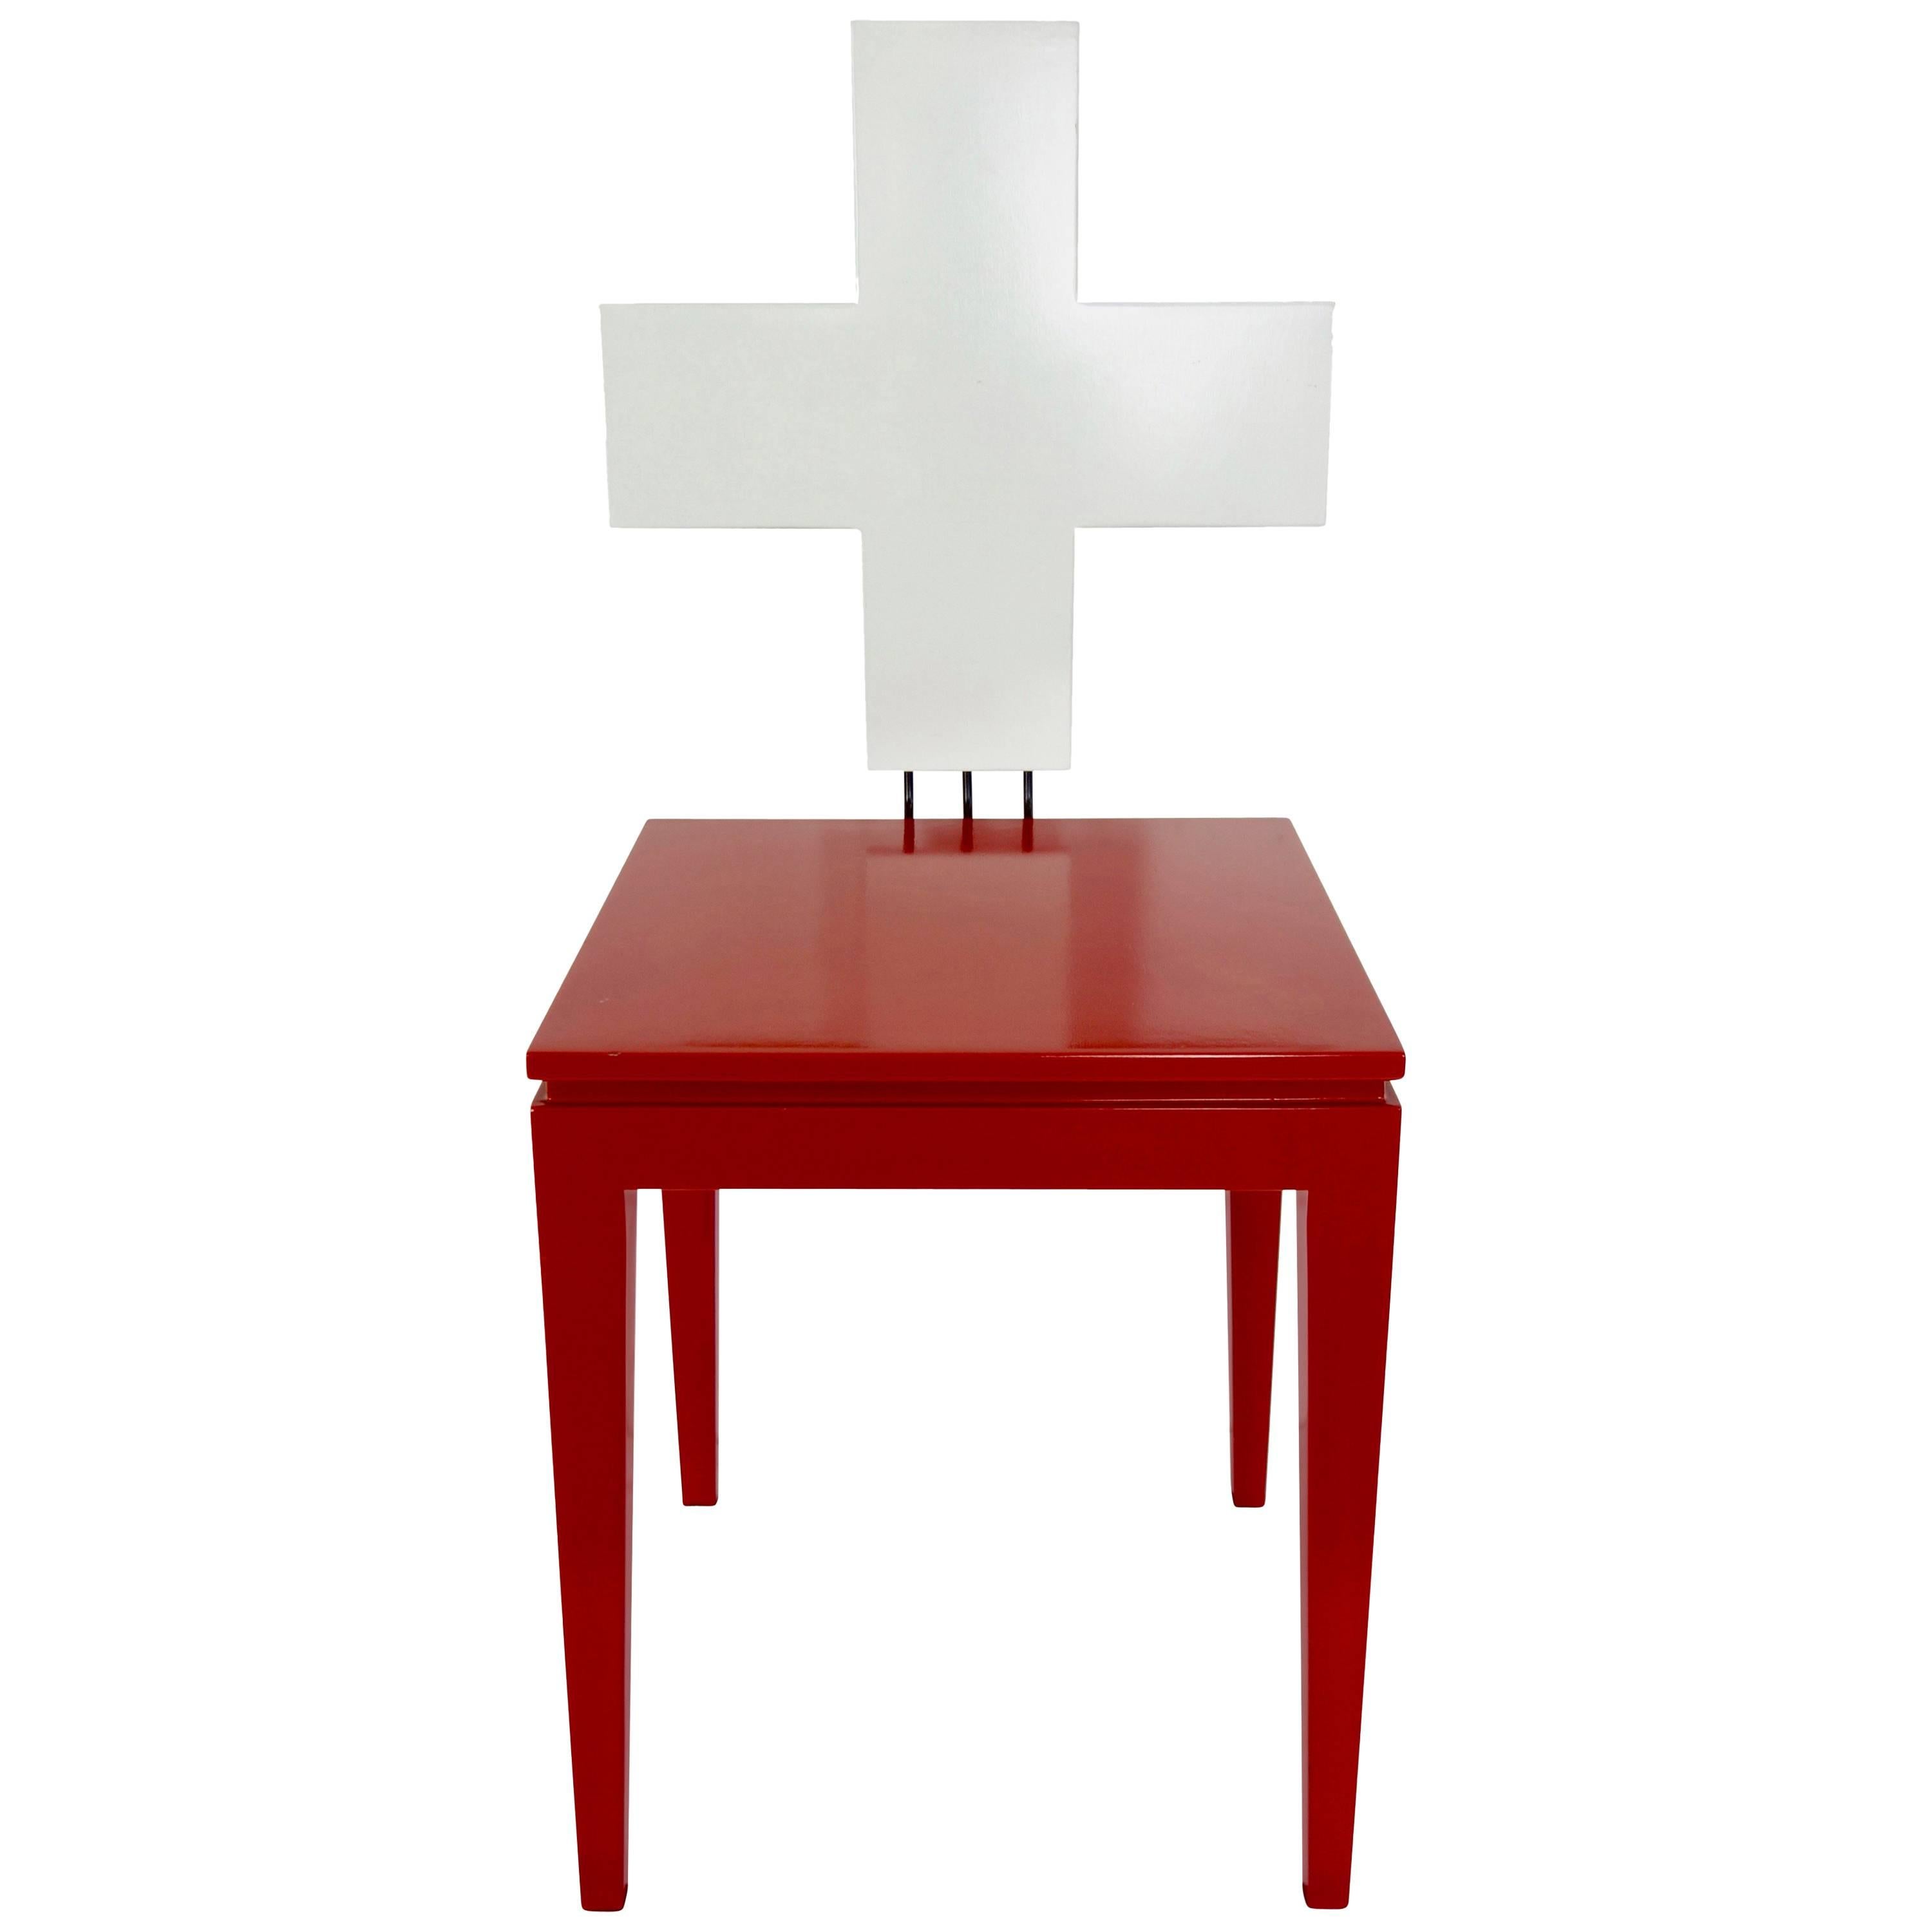 Red and White “Schwiiz” Chair Designed by Reto Kaufmann For Sale